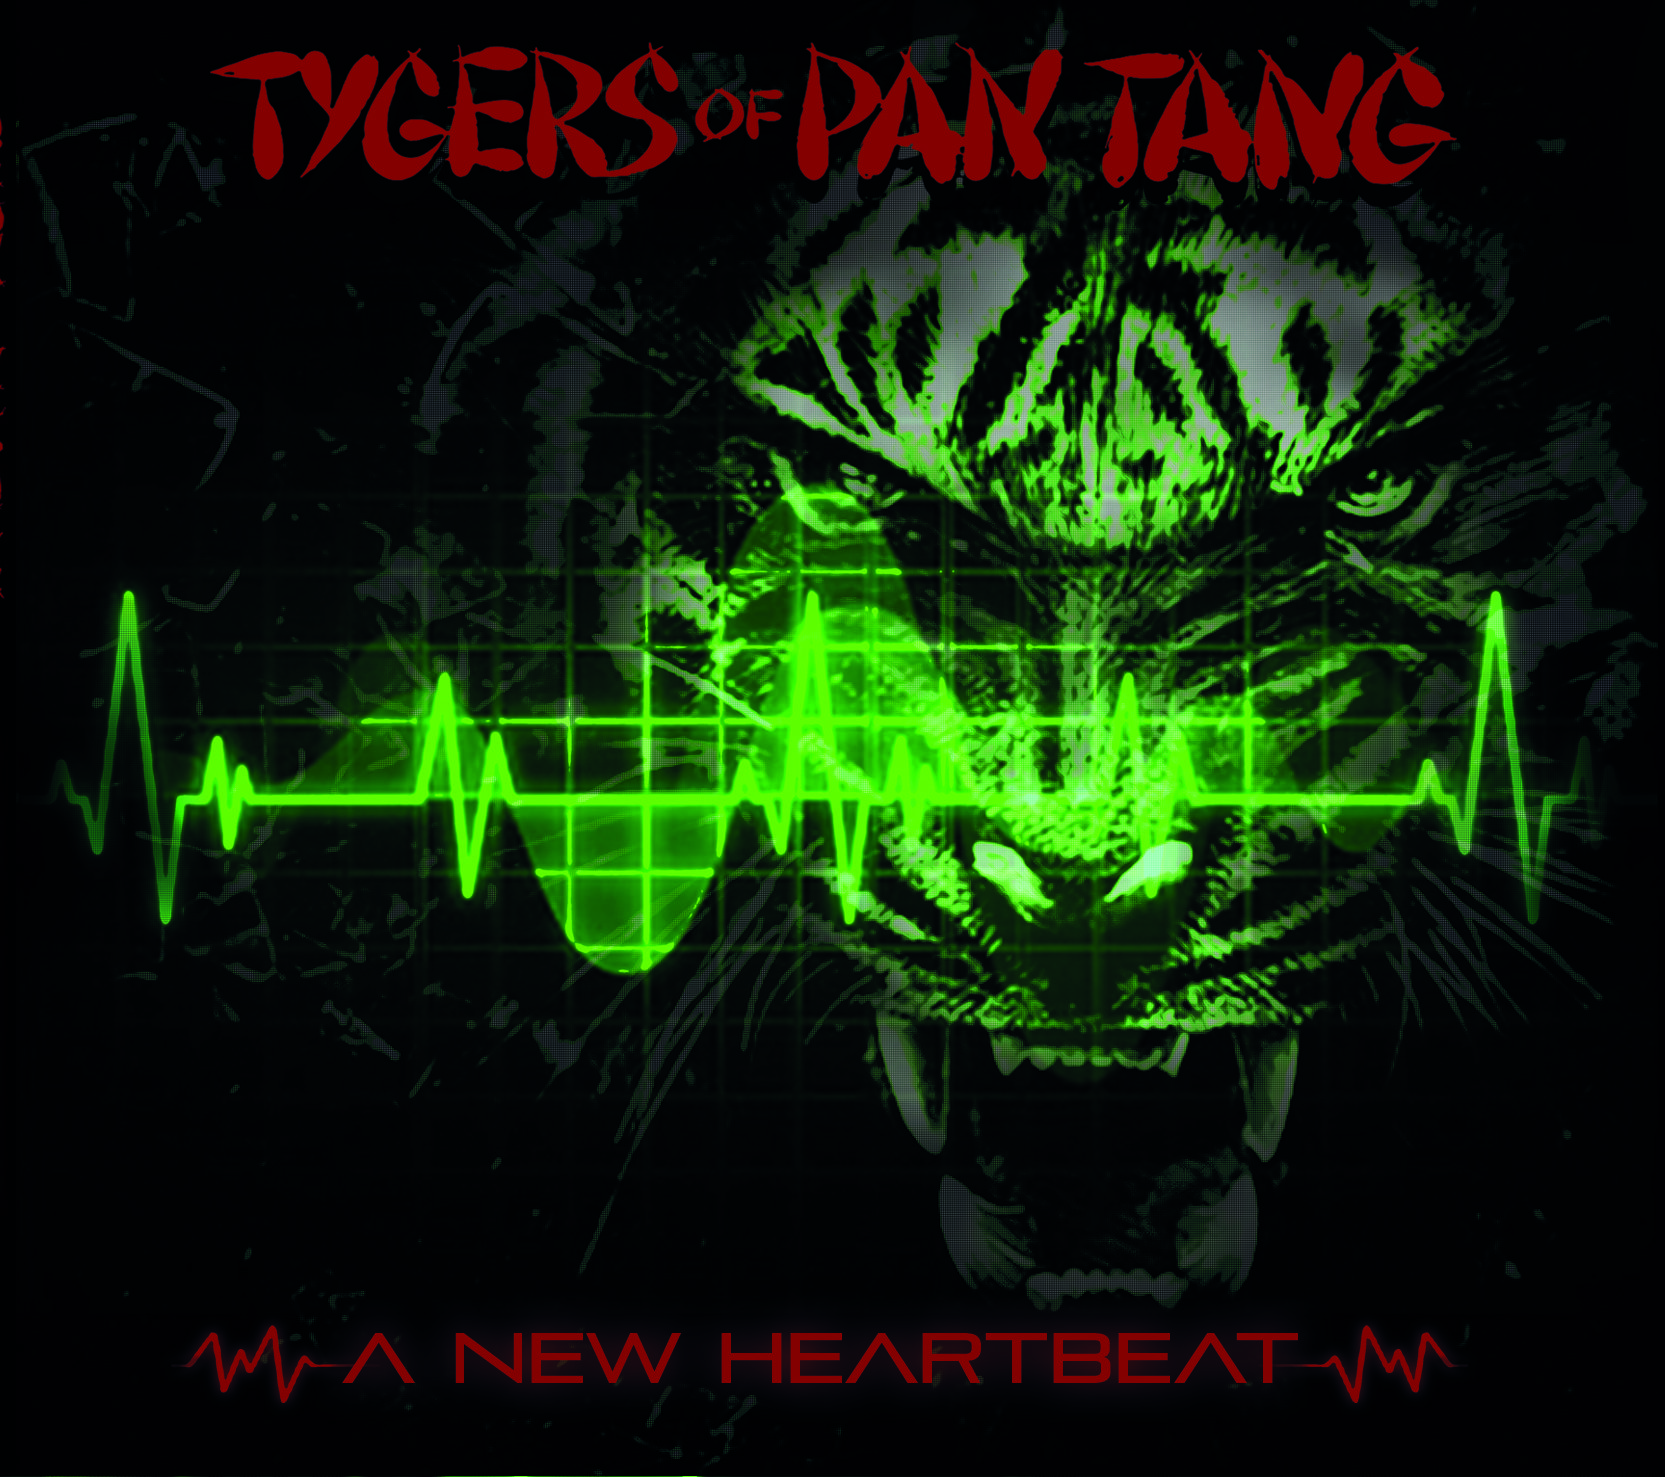 TYGERS OF PAN TANG – A new heartbeat